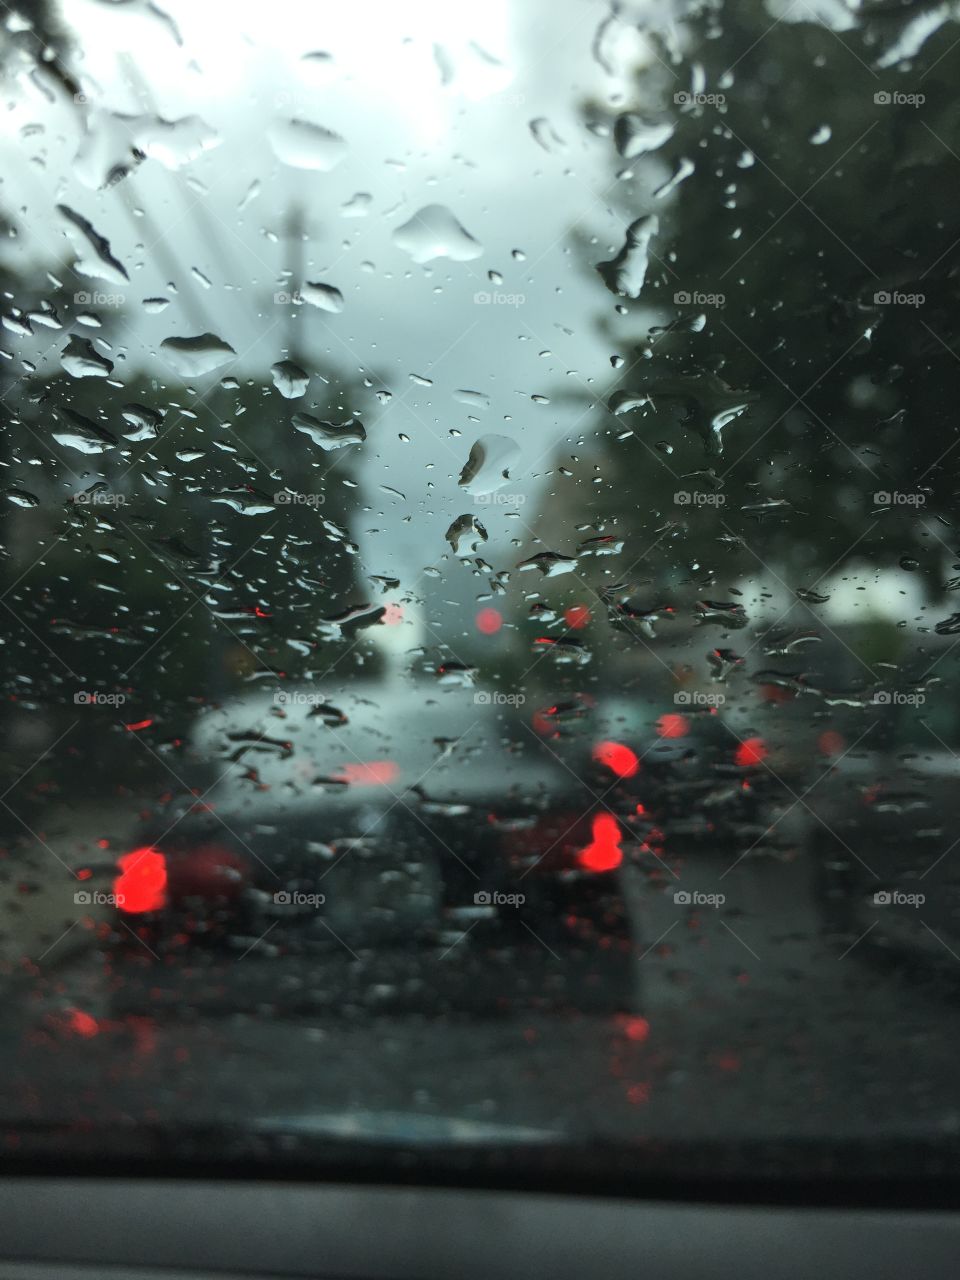 This picture was taken when I was going to work on a rainy day. 